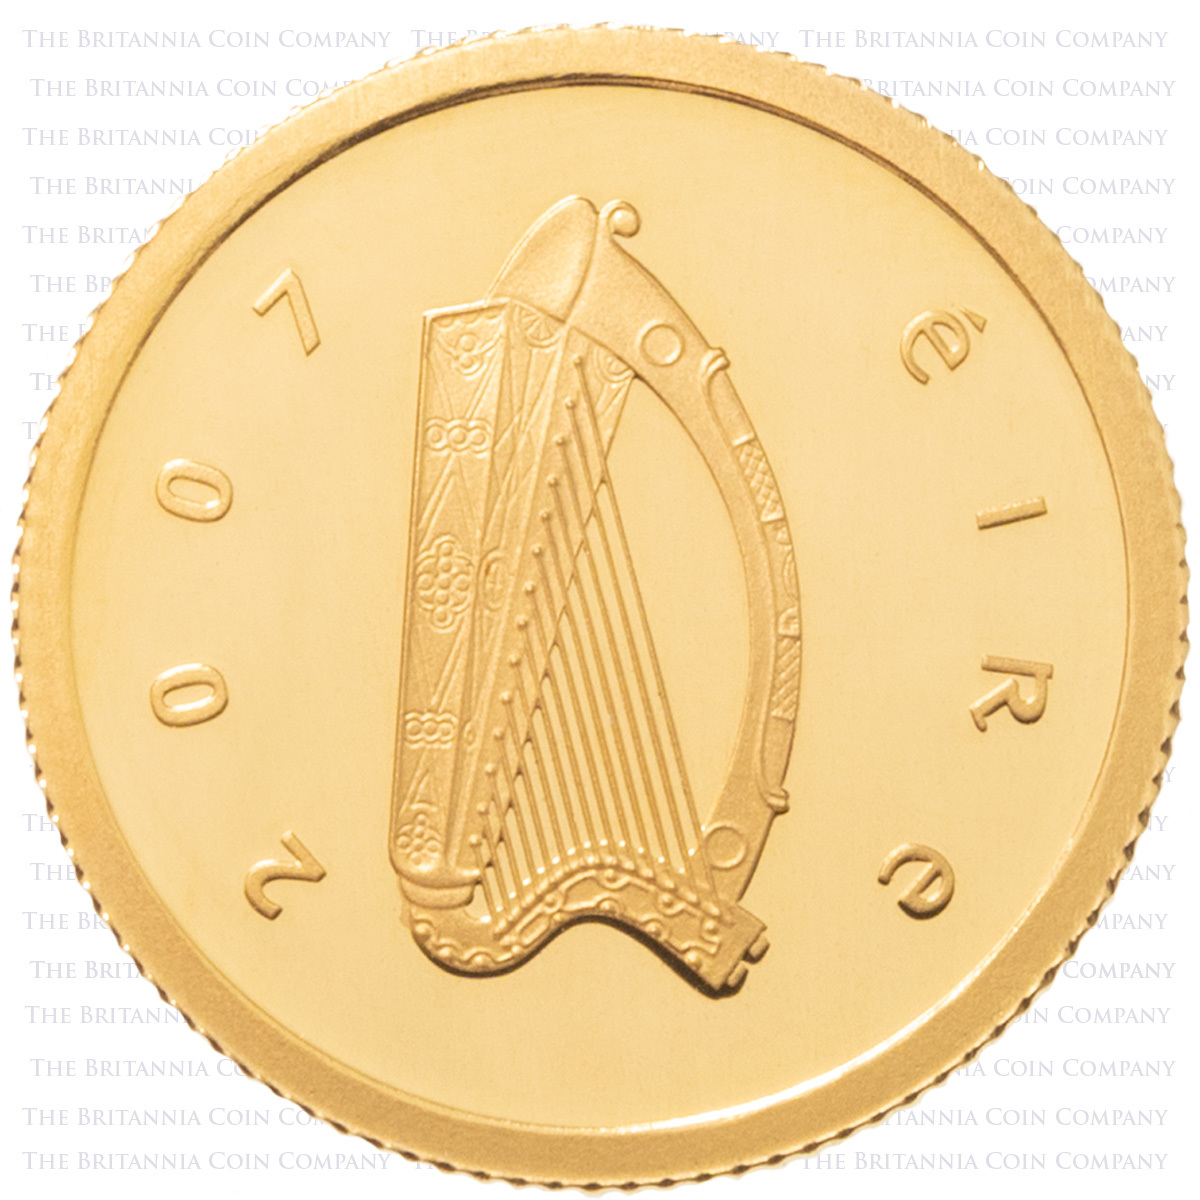 2007 Ireland Celtic Culture Euro Gold Silver Proof Two Coin Set gold coin obverse.